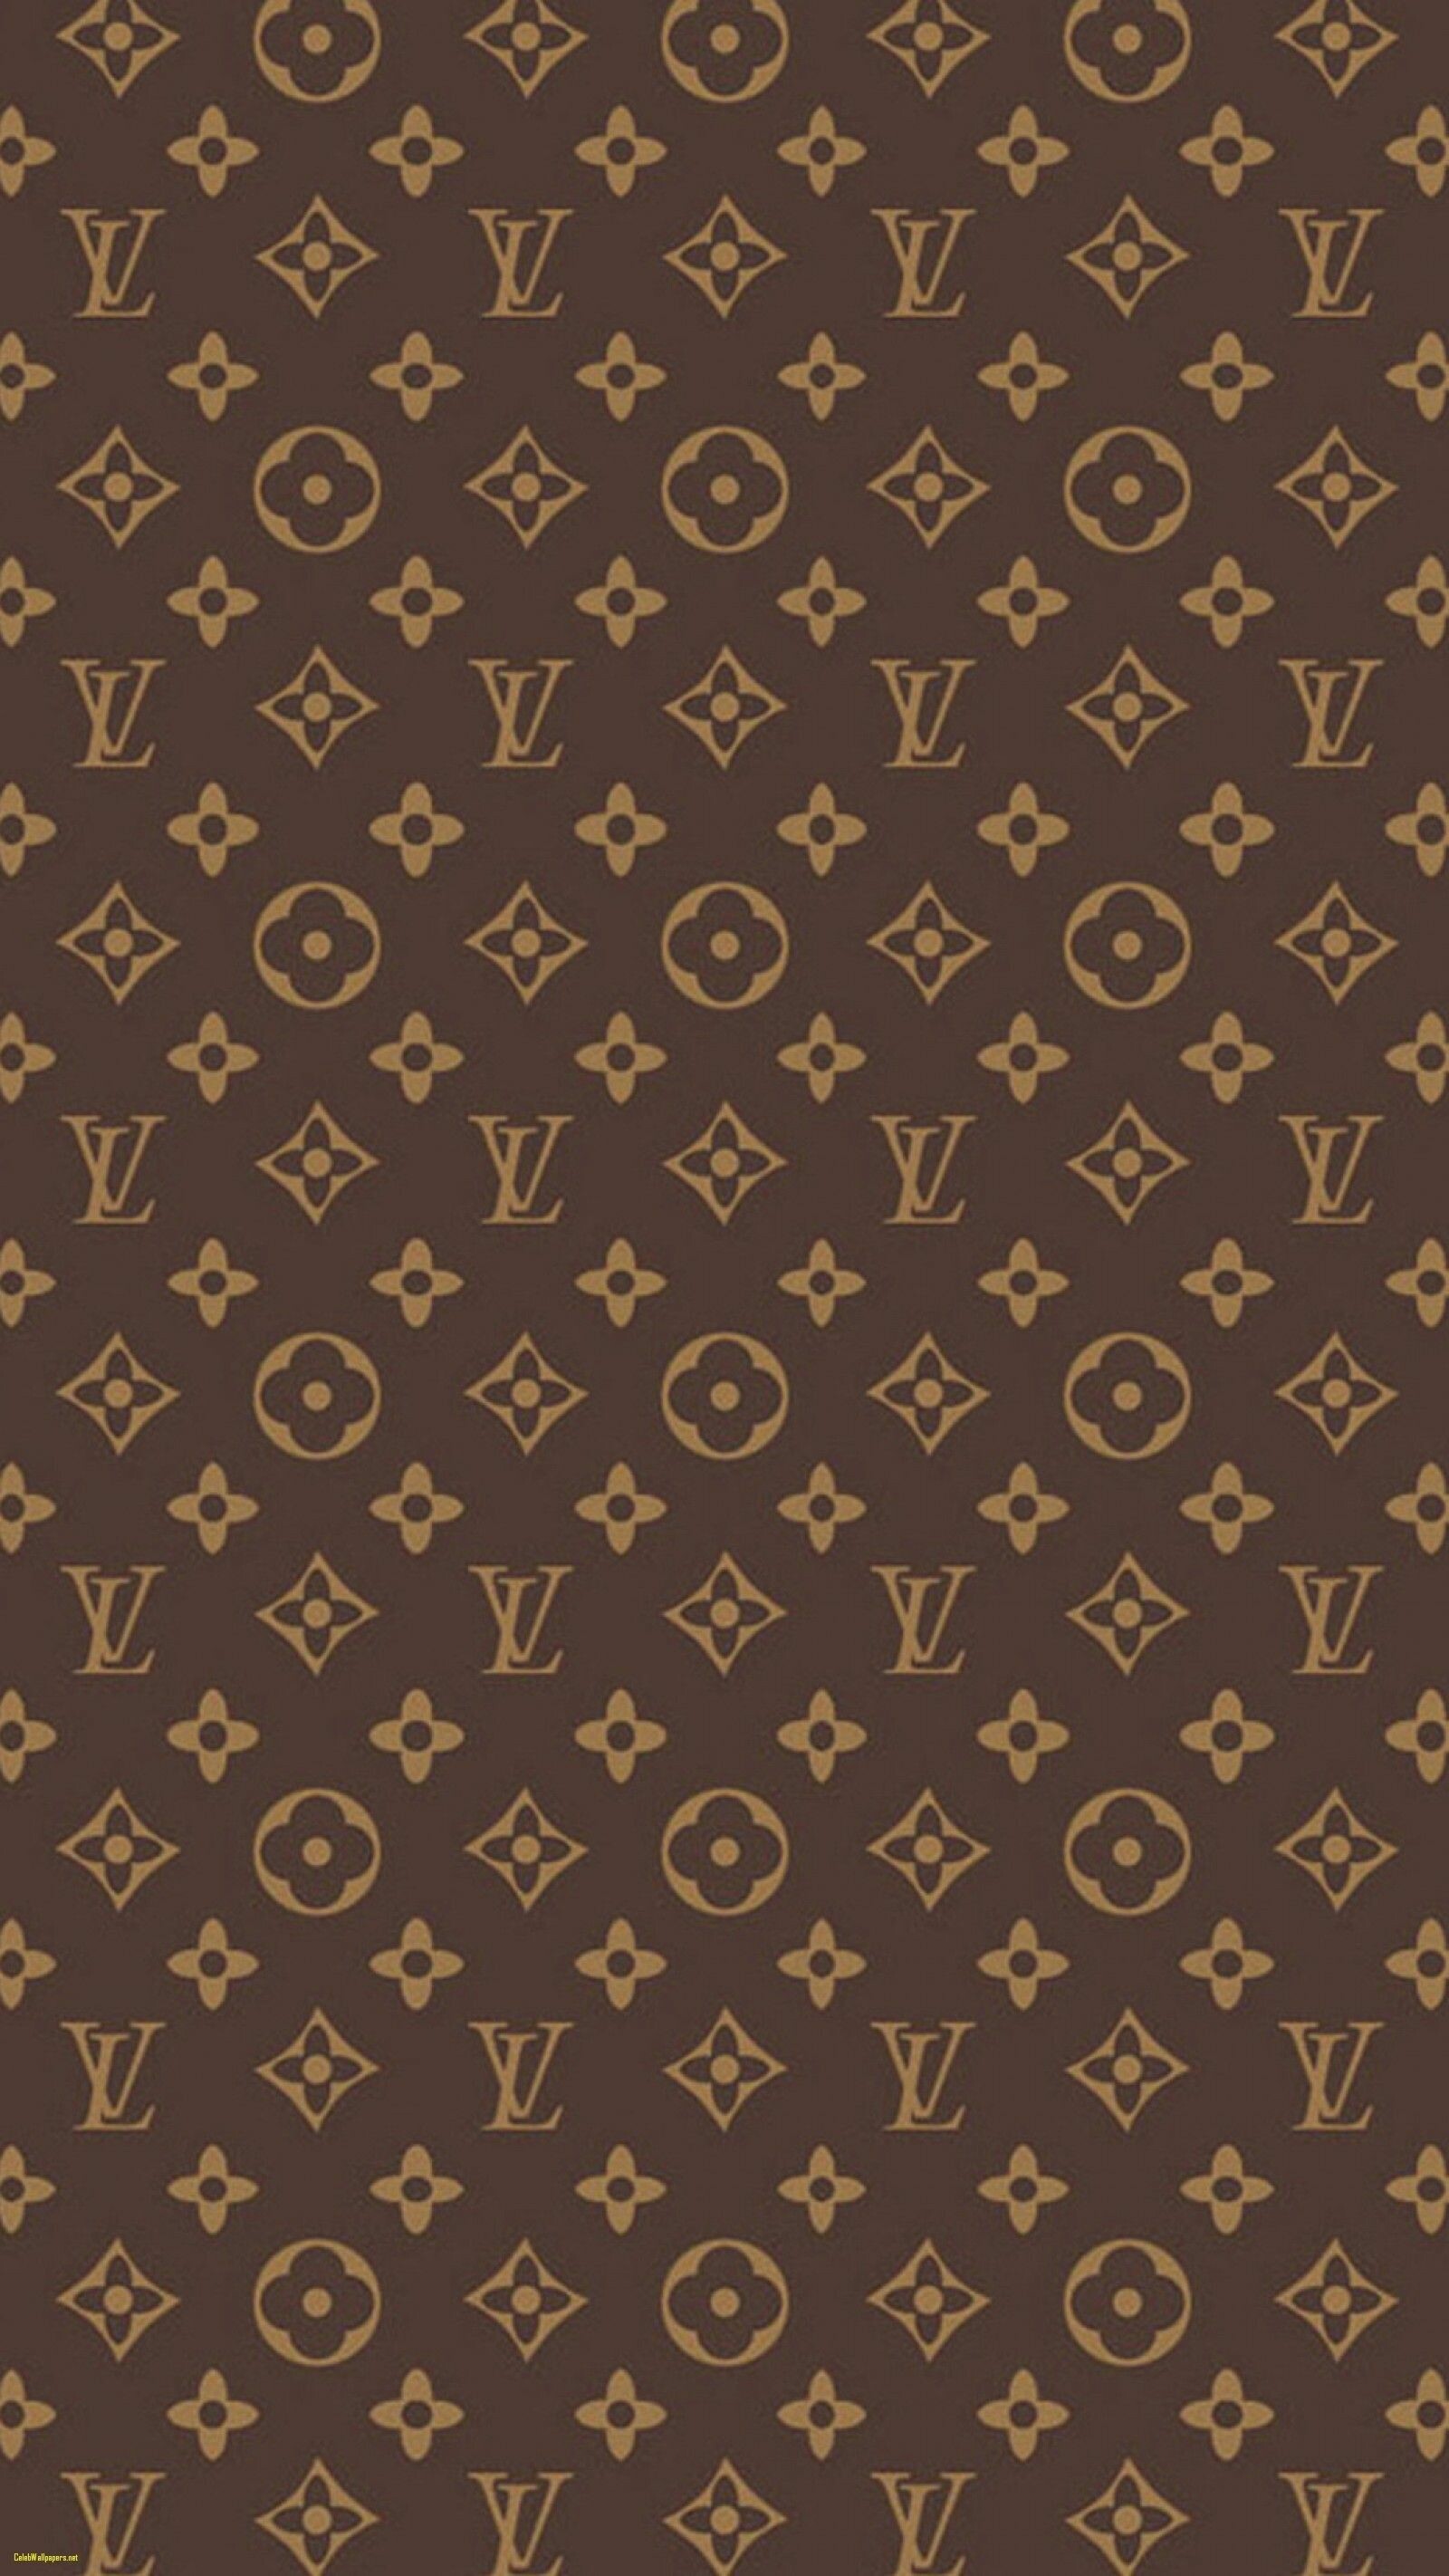 Louis Vuitton: The brand's reputation for quality and craftsmanship is unmatched. 1600x2850 HD Wallpaper.